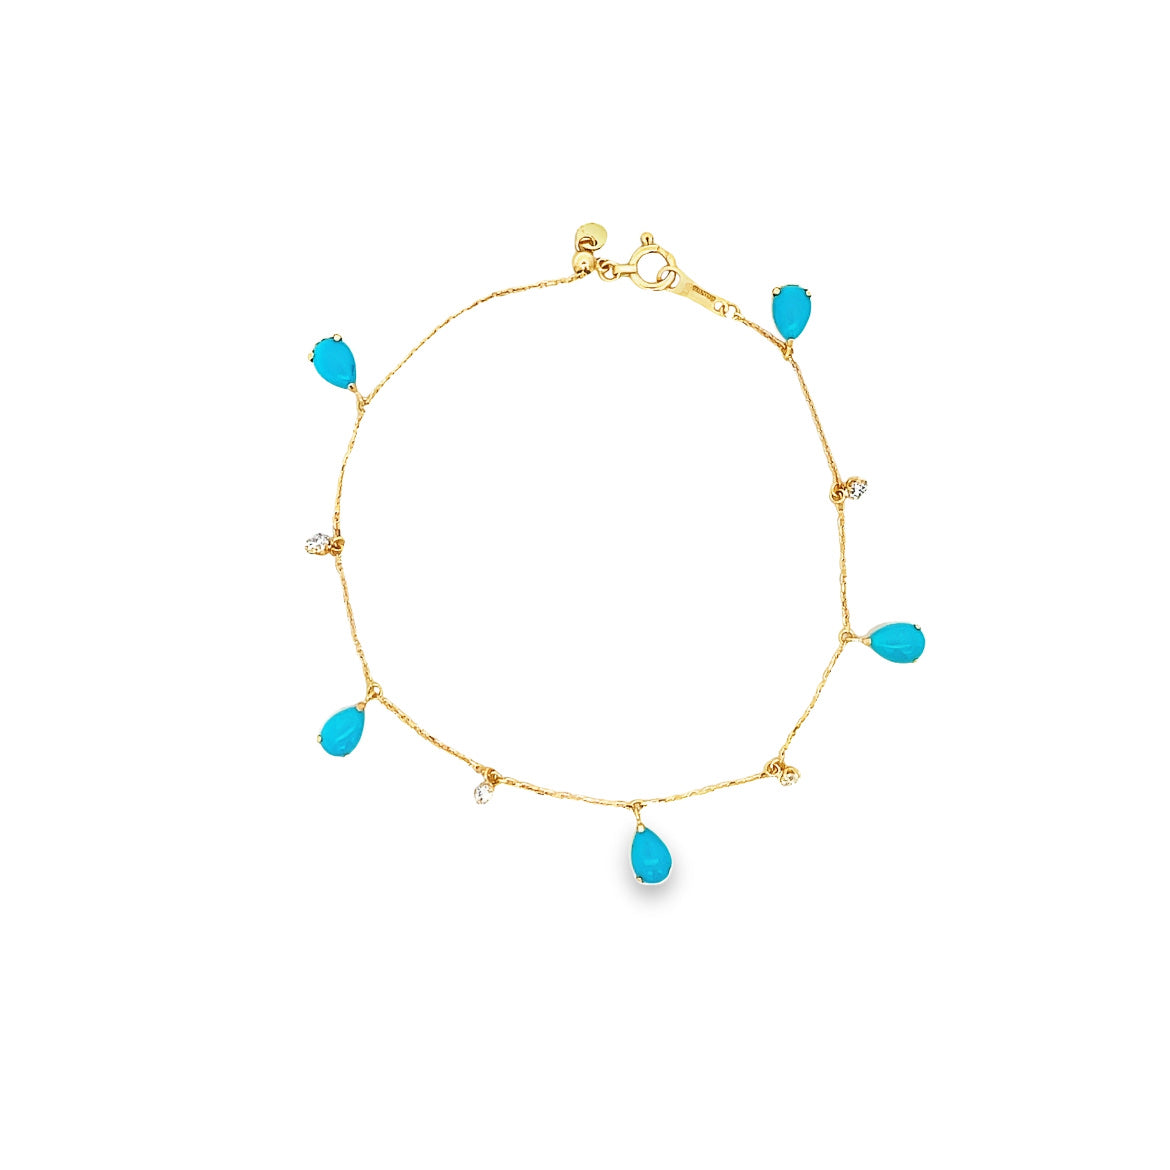 18K GOLD DIAMOND CHARMS BRACELET WITH TURQUOISE